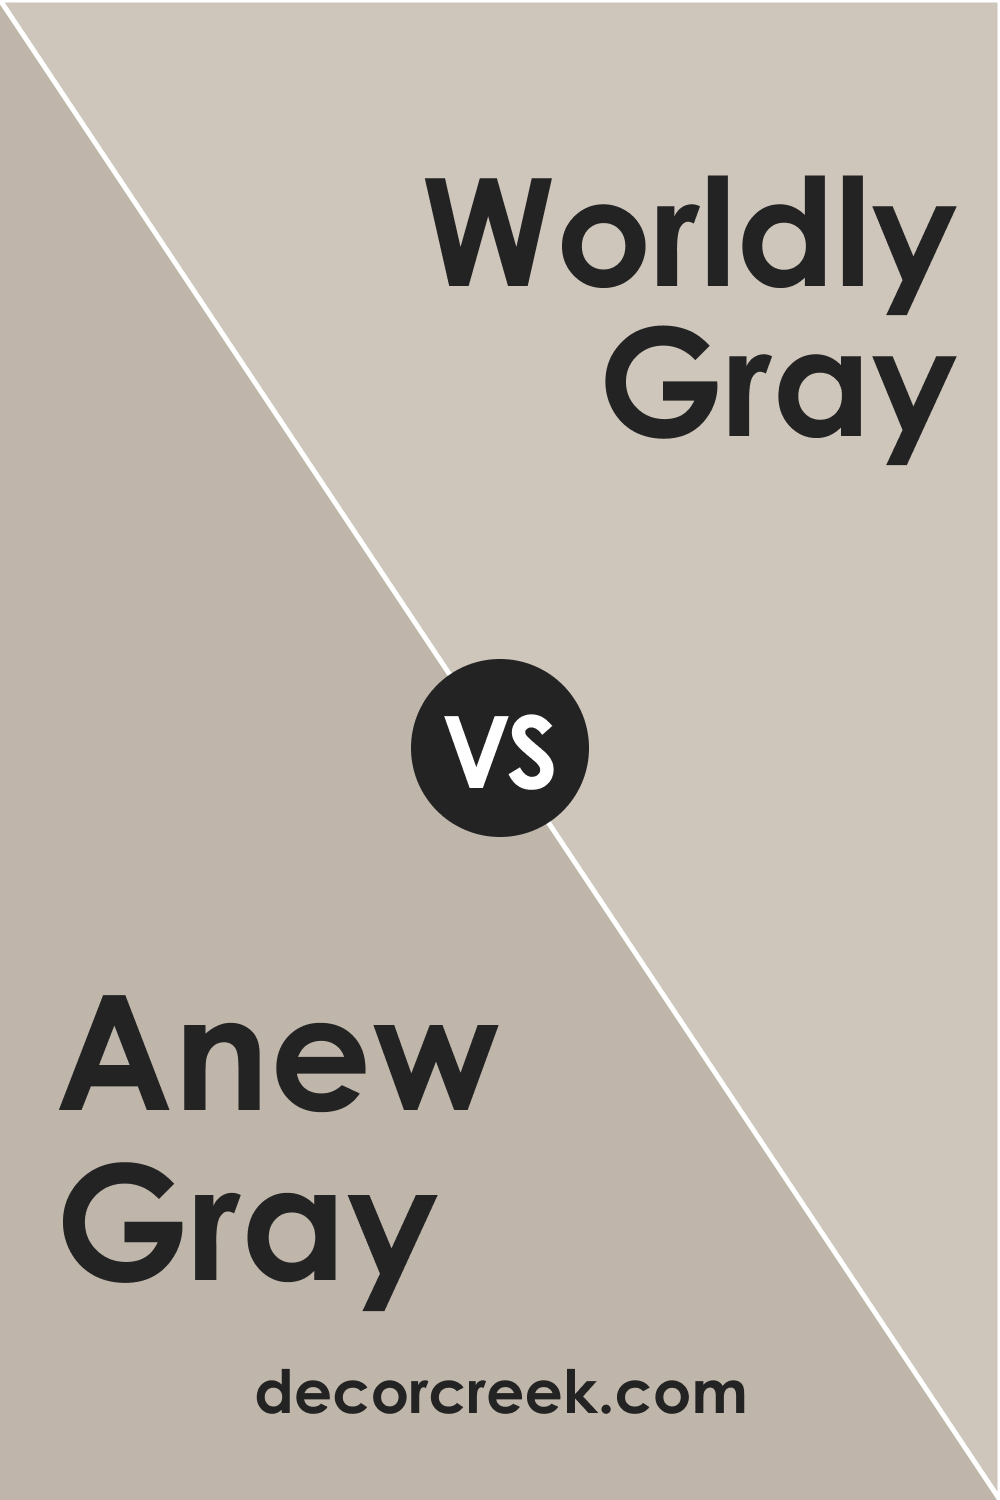 SW 7030 Anew Gray vs. SW Worldly Gray